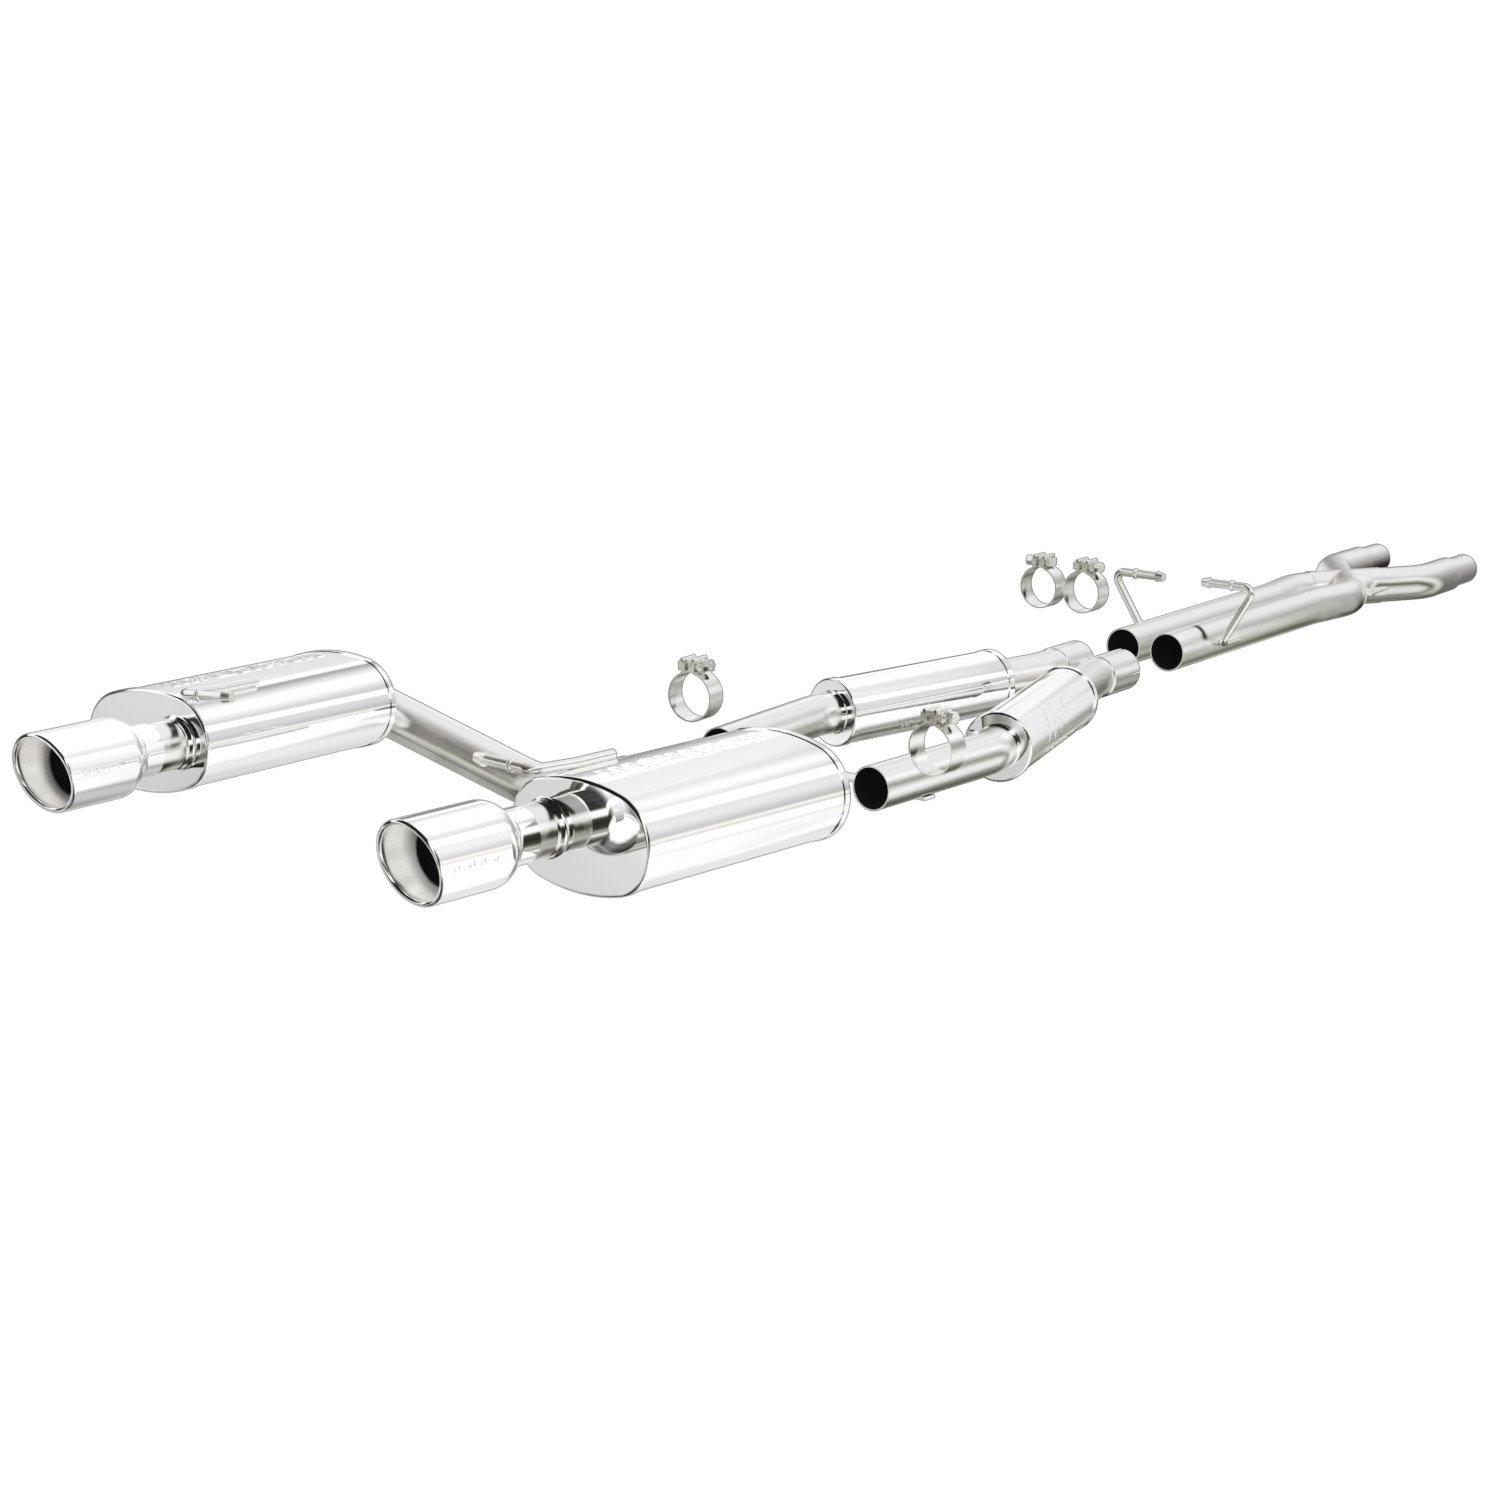 Touring Series Cat-Back Exhaust System 2005-2008 Audi A4 Quattro 3.2L V6 (Excludes Avant)